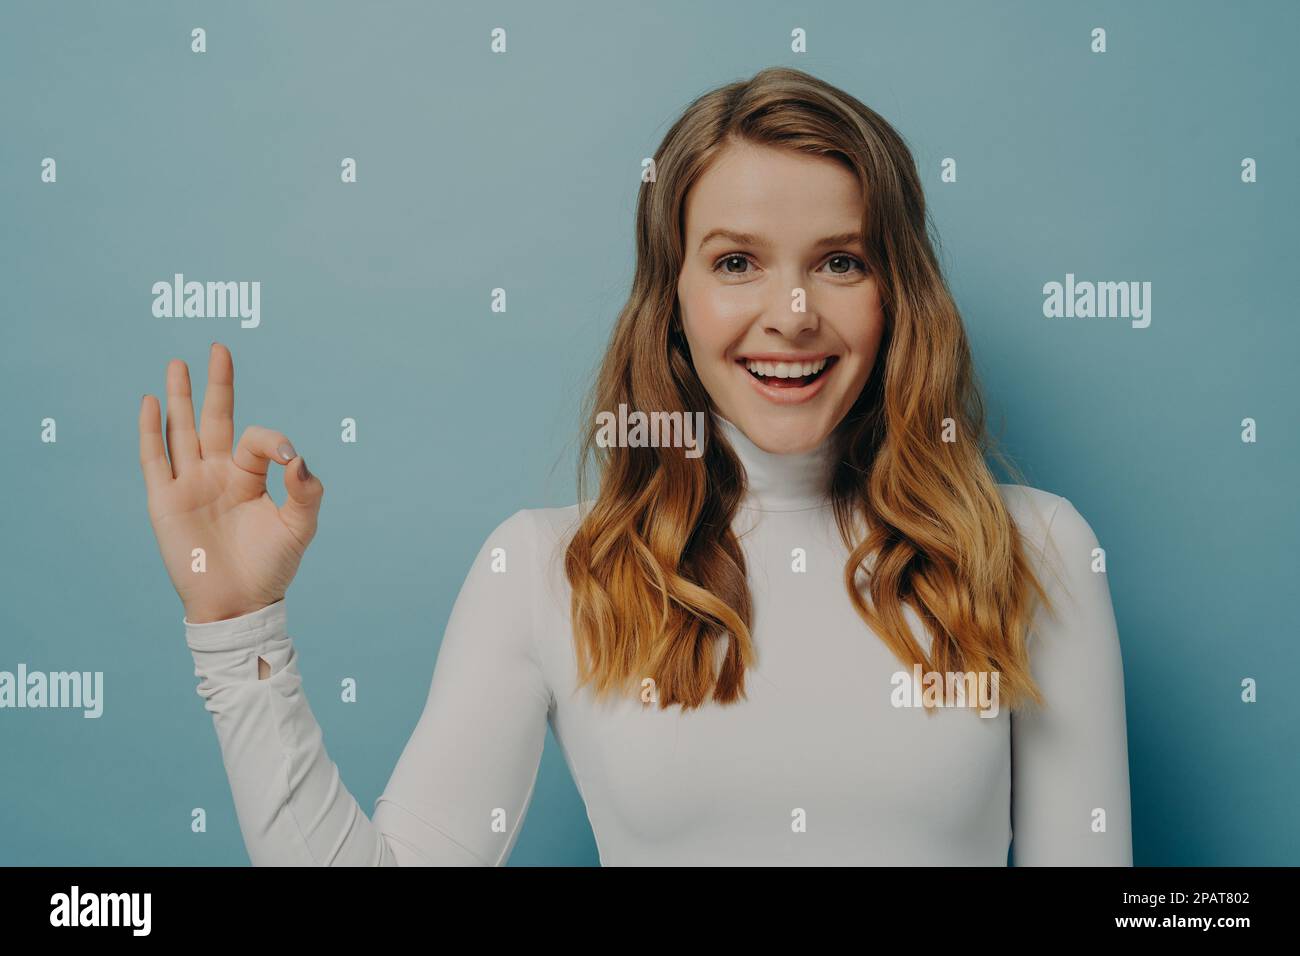 Half-length image of beautiful excited joyful young lady with dyed light-brown hair gesturing ok symbol with fingers, looking at camera with beaming s Stock Photo